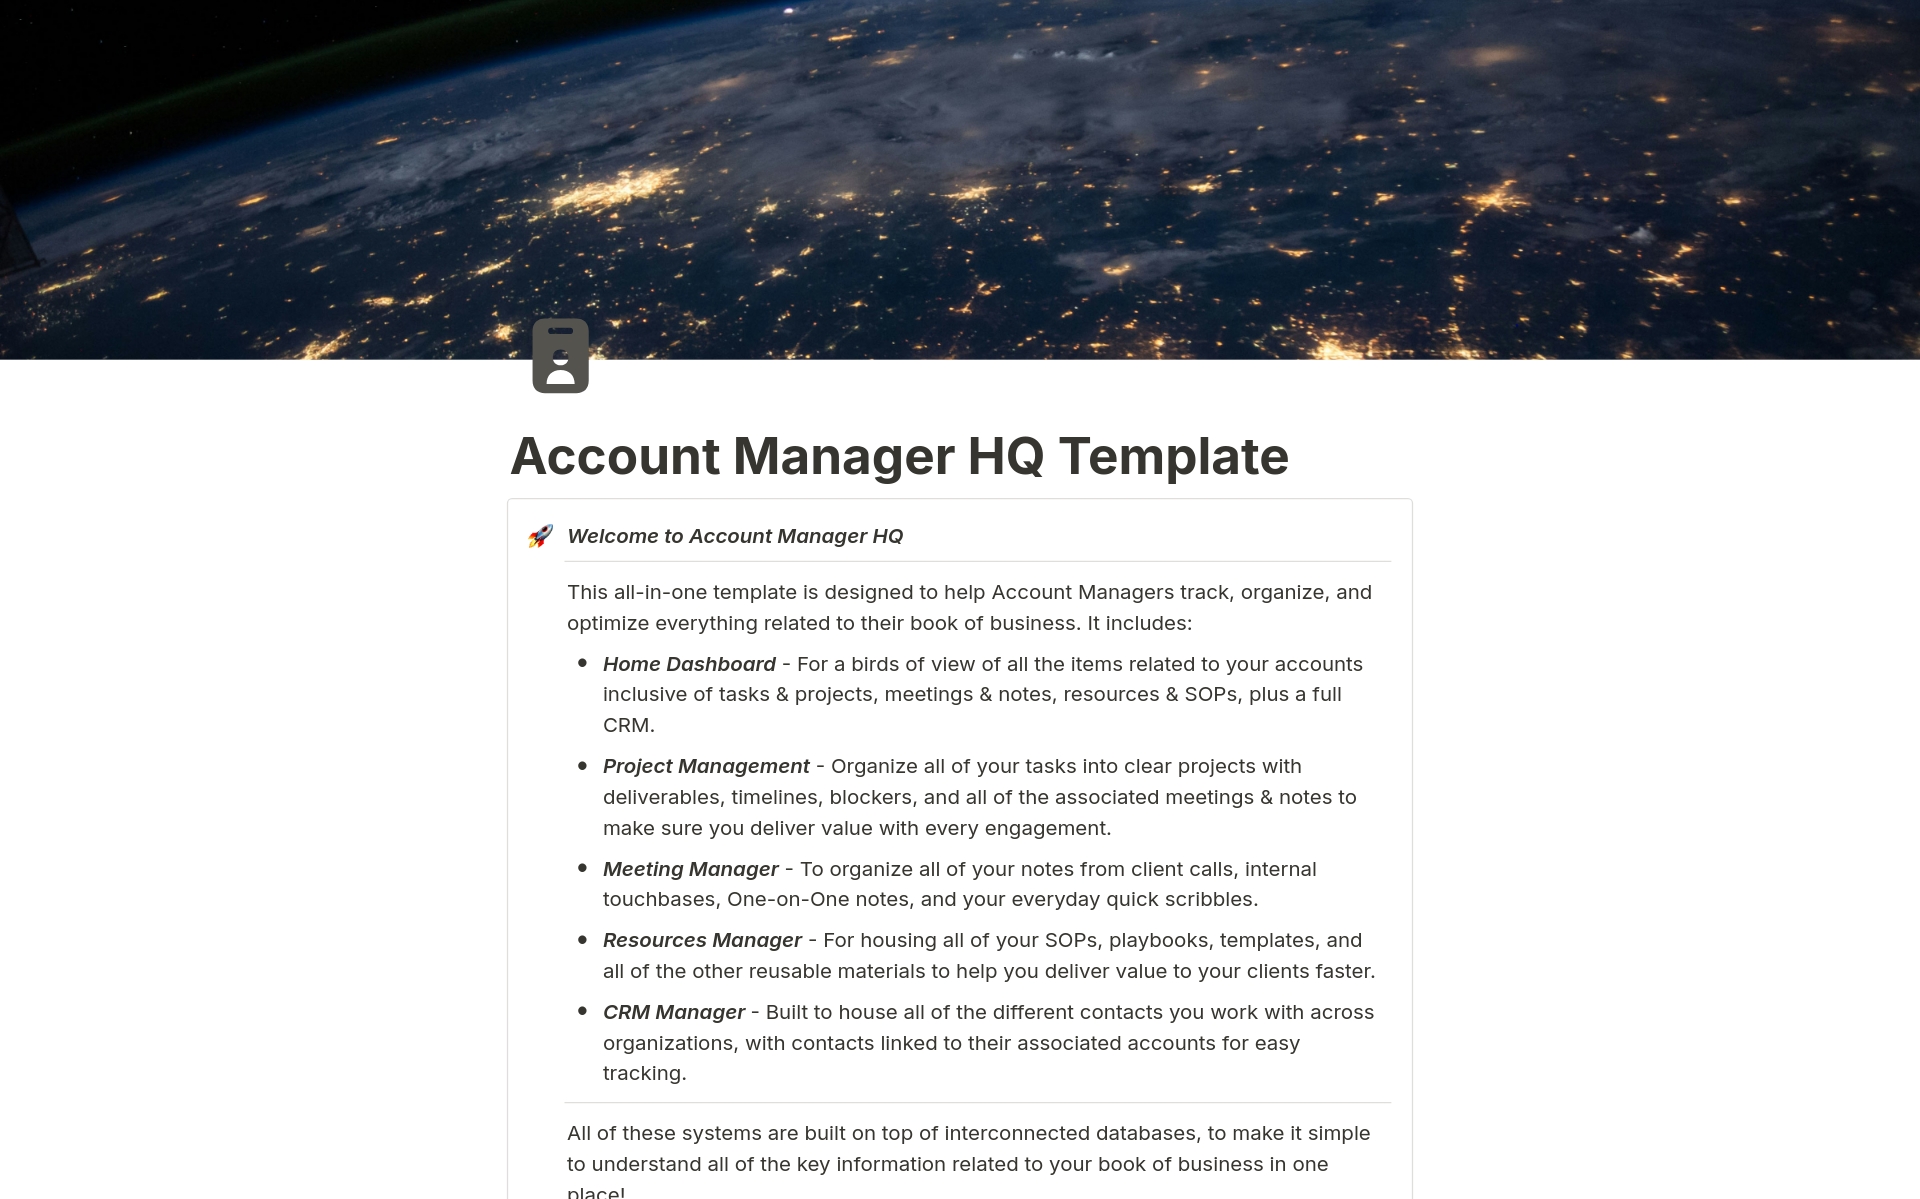 This all-in-one template is designed to help Account Managers track, organize, and optimize everything related to their book of business. Including accounts, renewals, tasks, projects, meetings, documents and template resources.